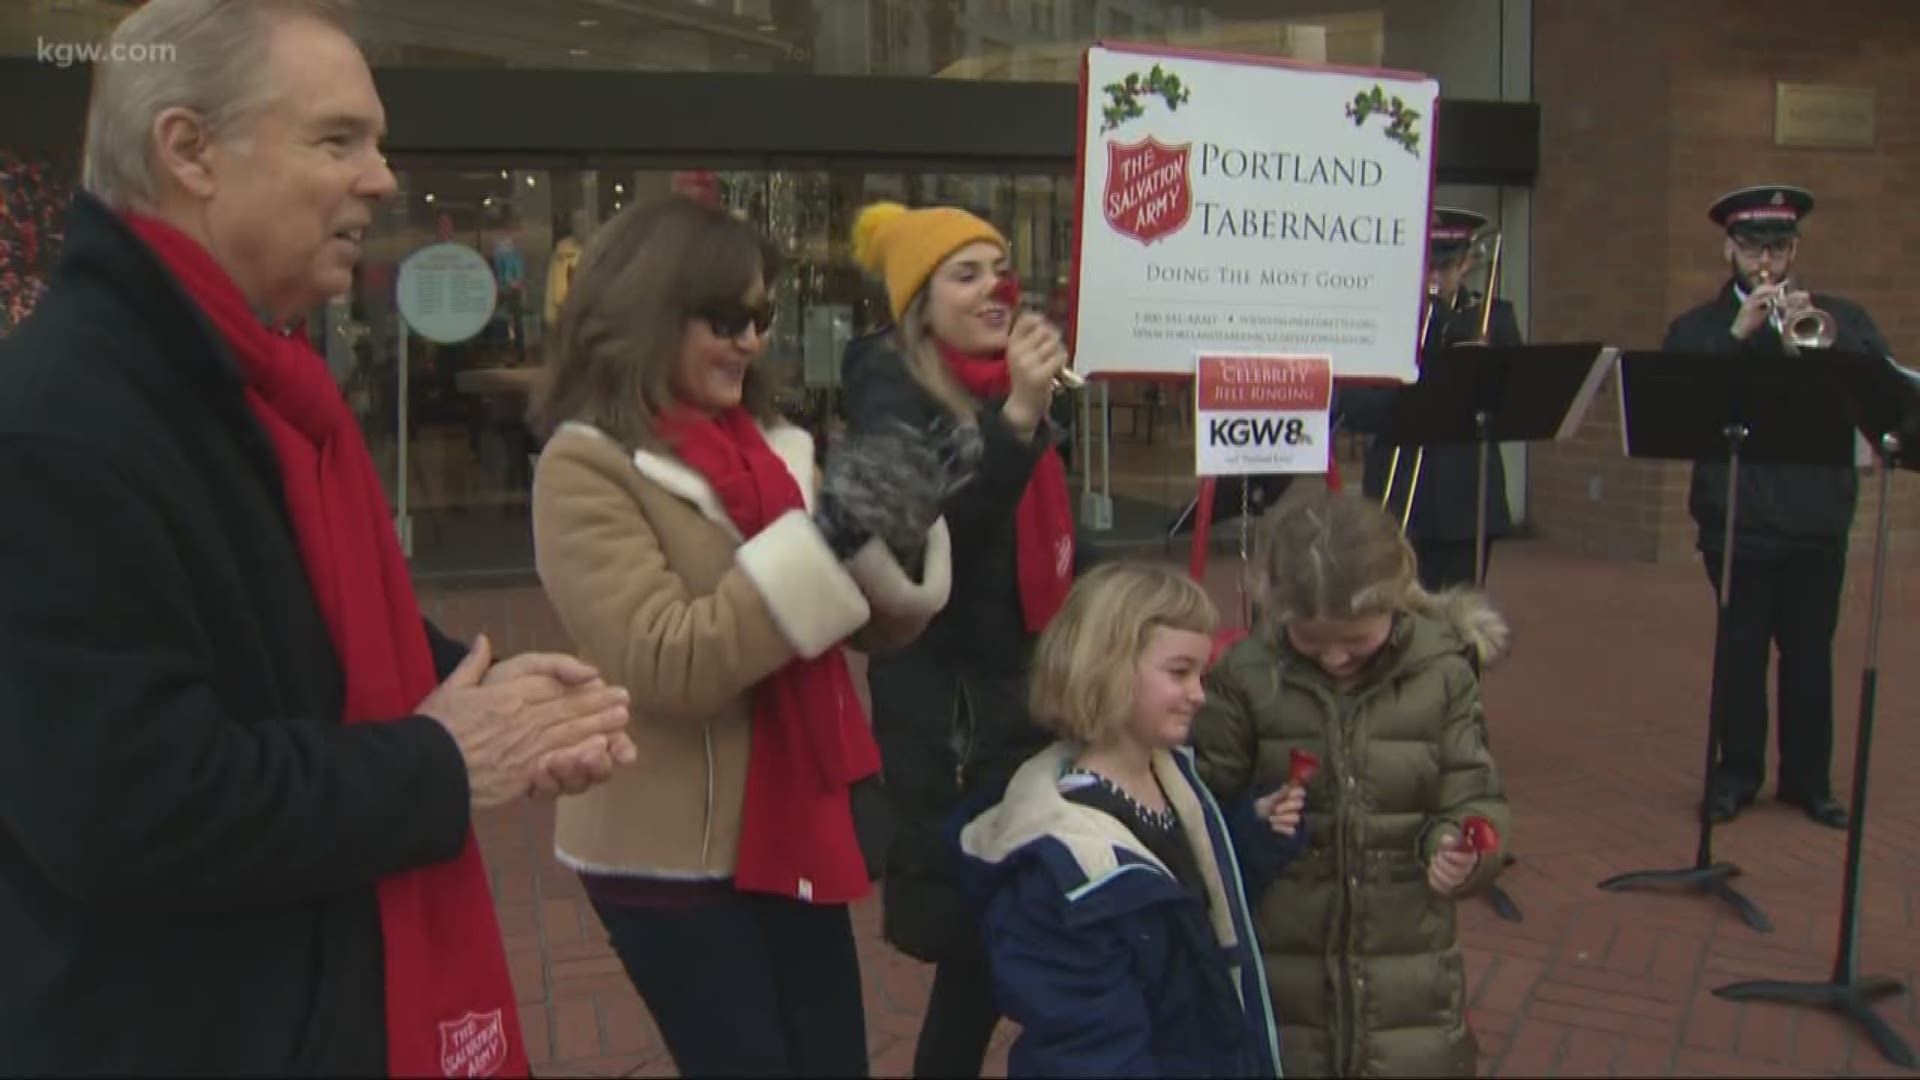 Cassidy joins Portland tv personalities to ring the bell for the Salvation Army. 

salvationarmyusa.org

#TonightwithCassidy